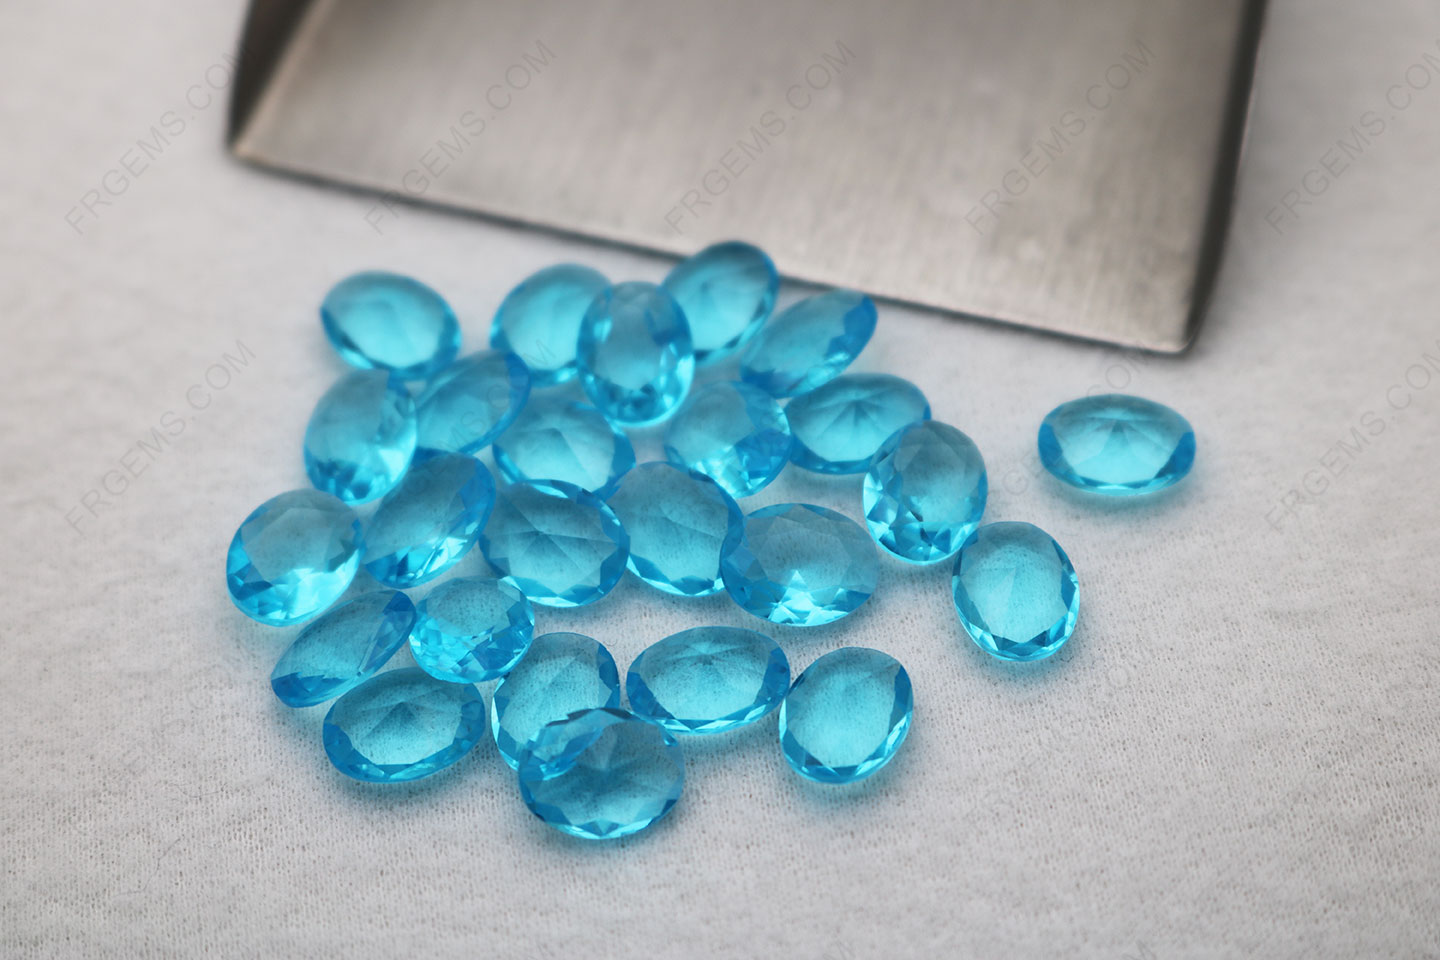 Wholesale Glass Simulated Swiss blue Color BA316# Oval shape faceted cut 9x7mm Loose gemstones